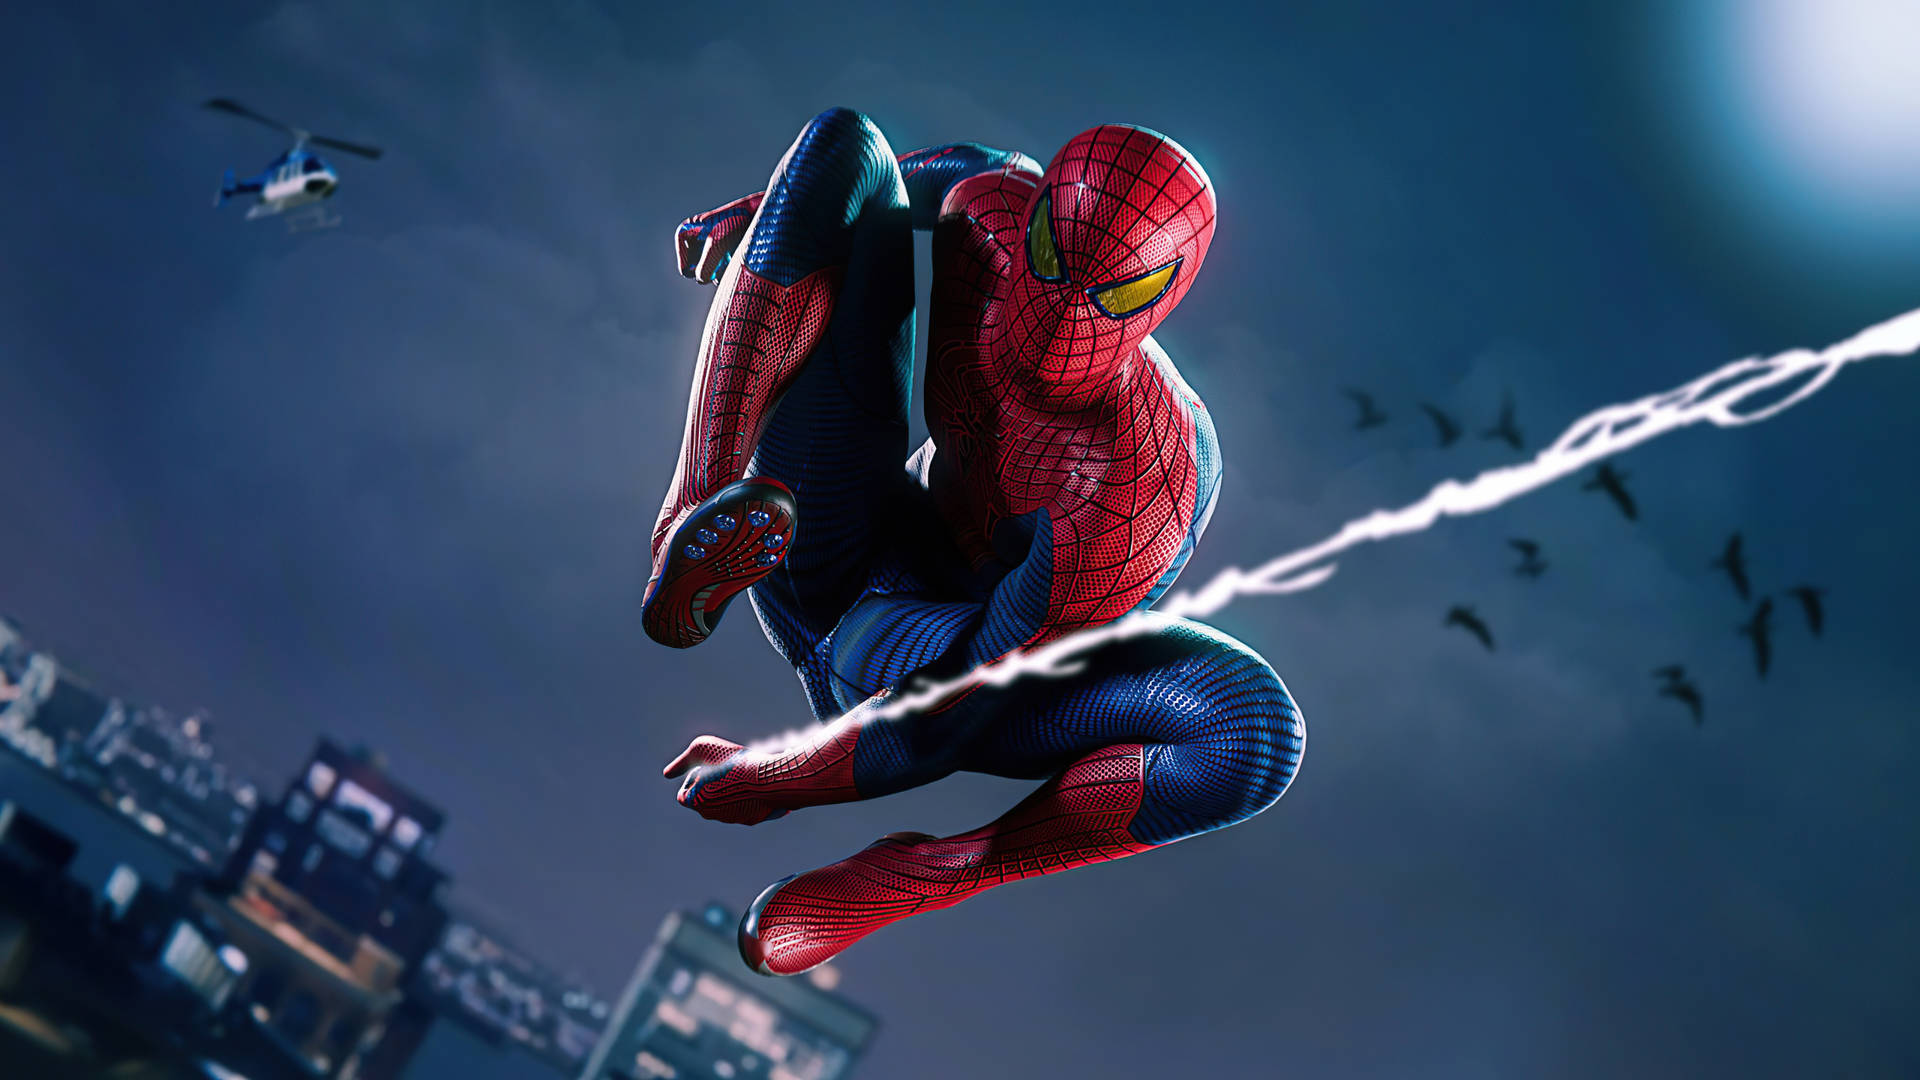 The web slinger takes the rooftops of Manhattan by storm. Wallpaper